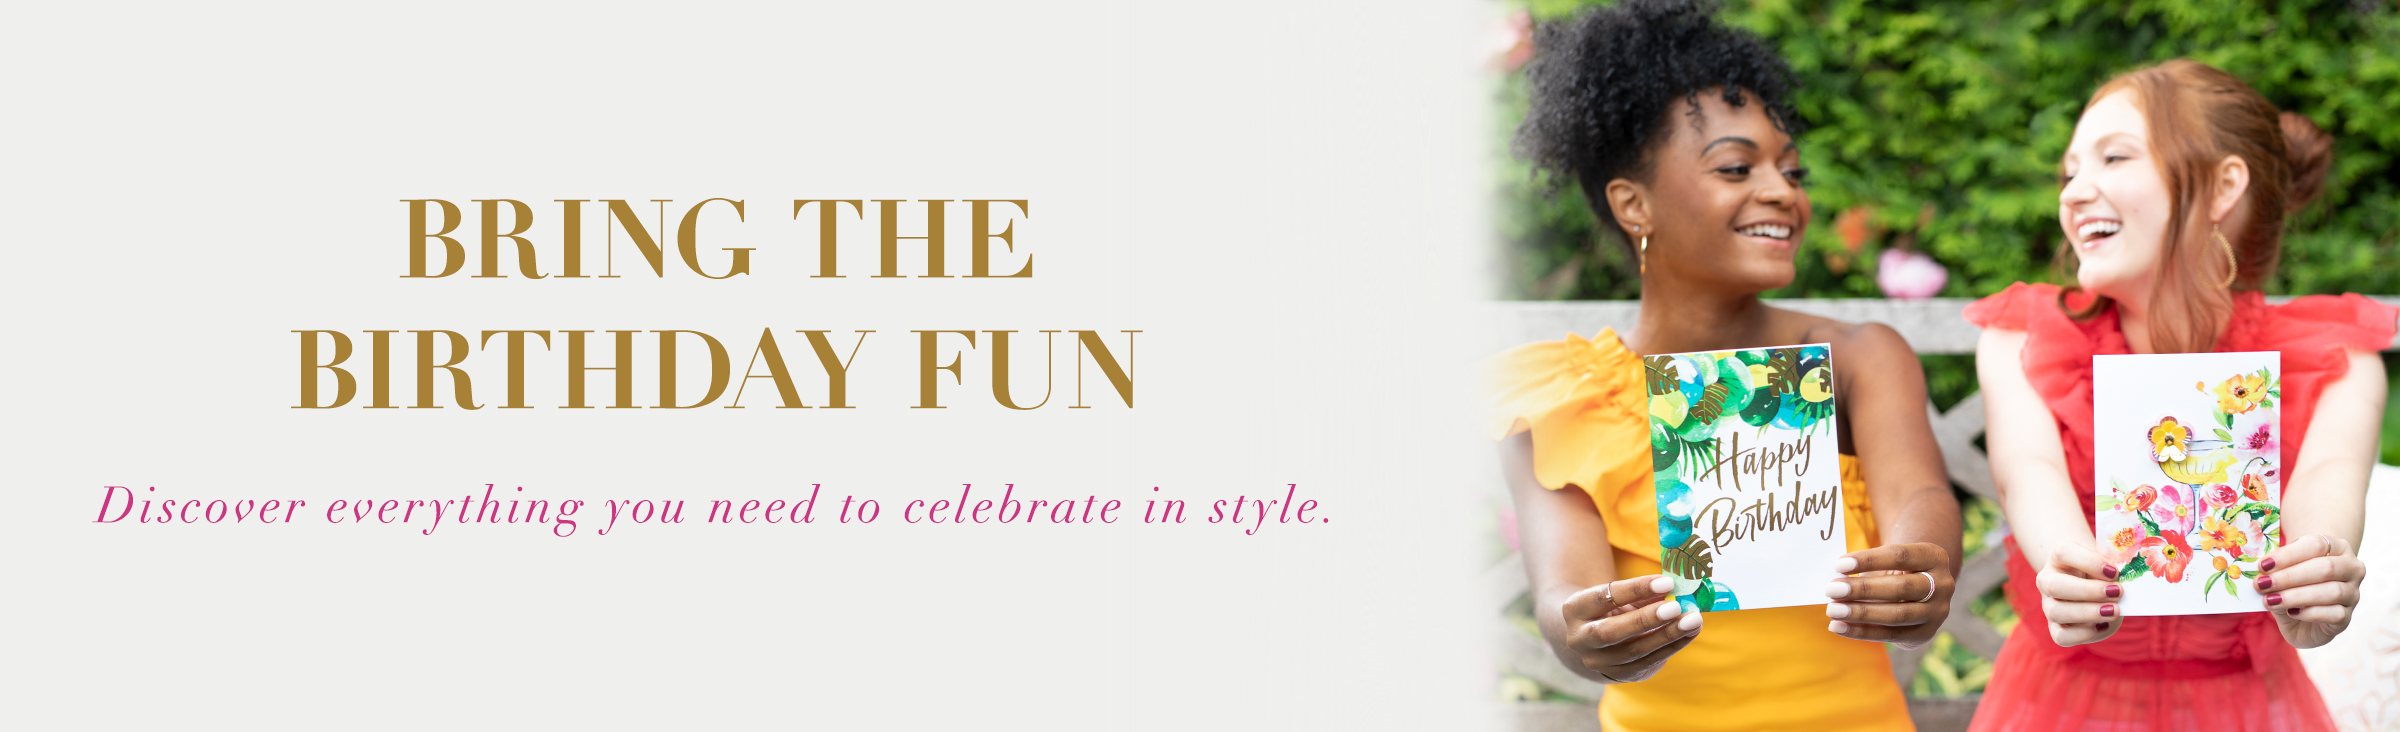 Bring the birthday fun Discover everything you need to celebrate in style